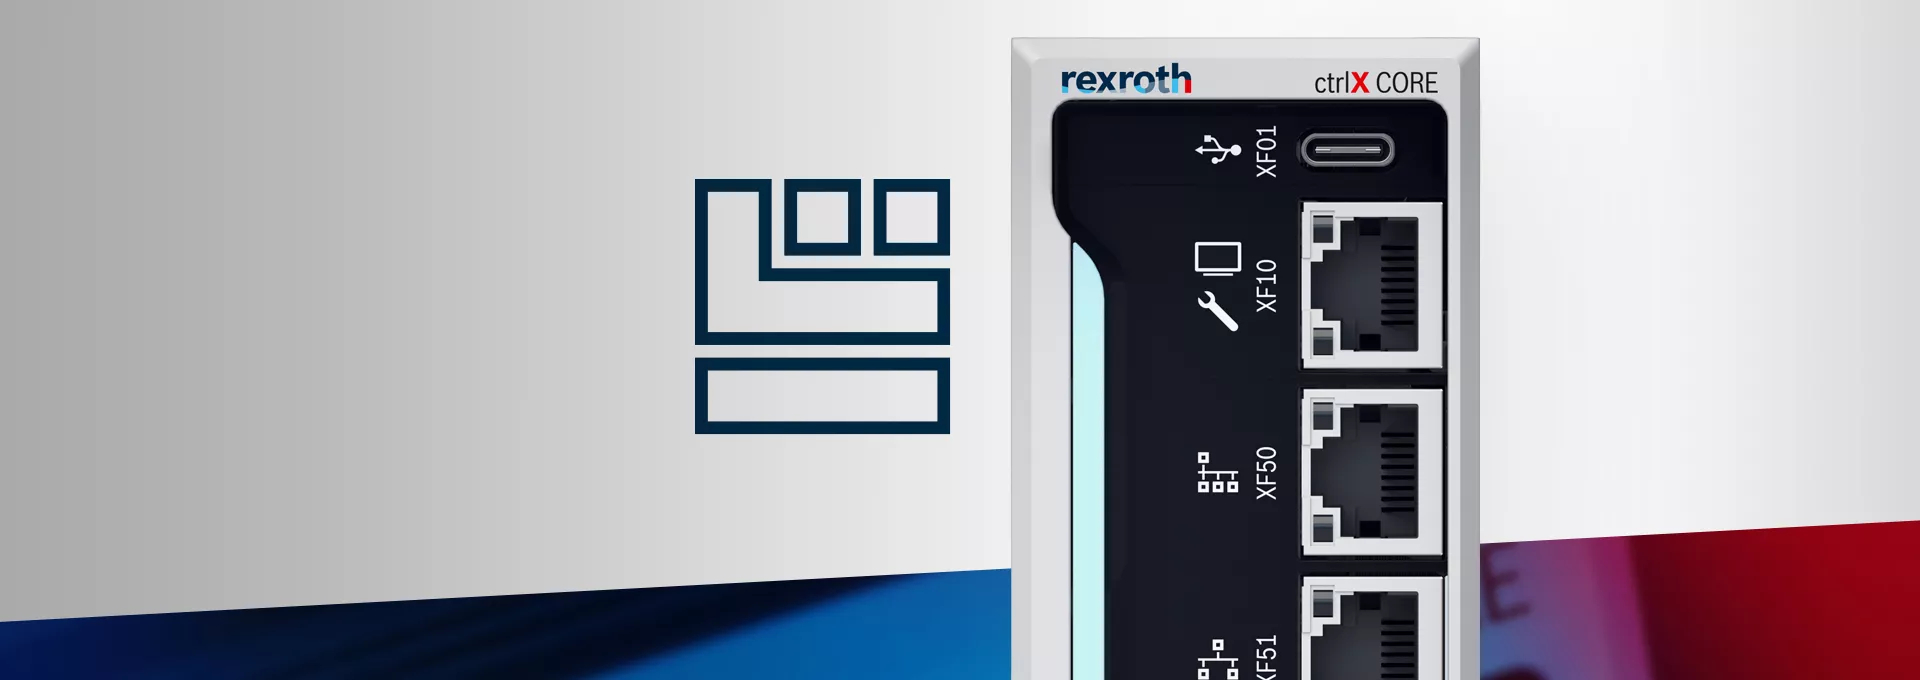 MC Bosch Rexroth Presents ctrlX OS Operating System Now Available 2 1920x680